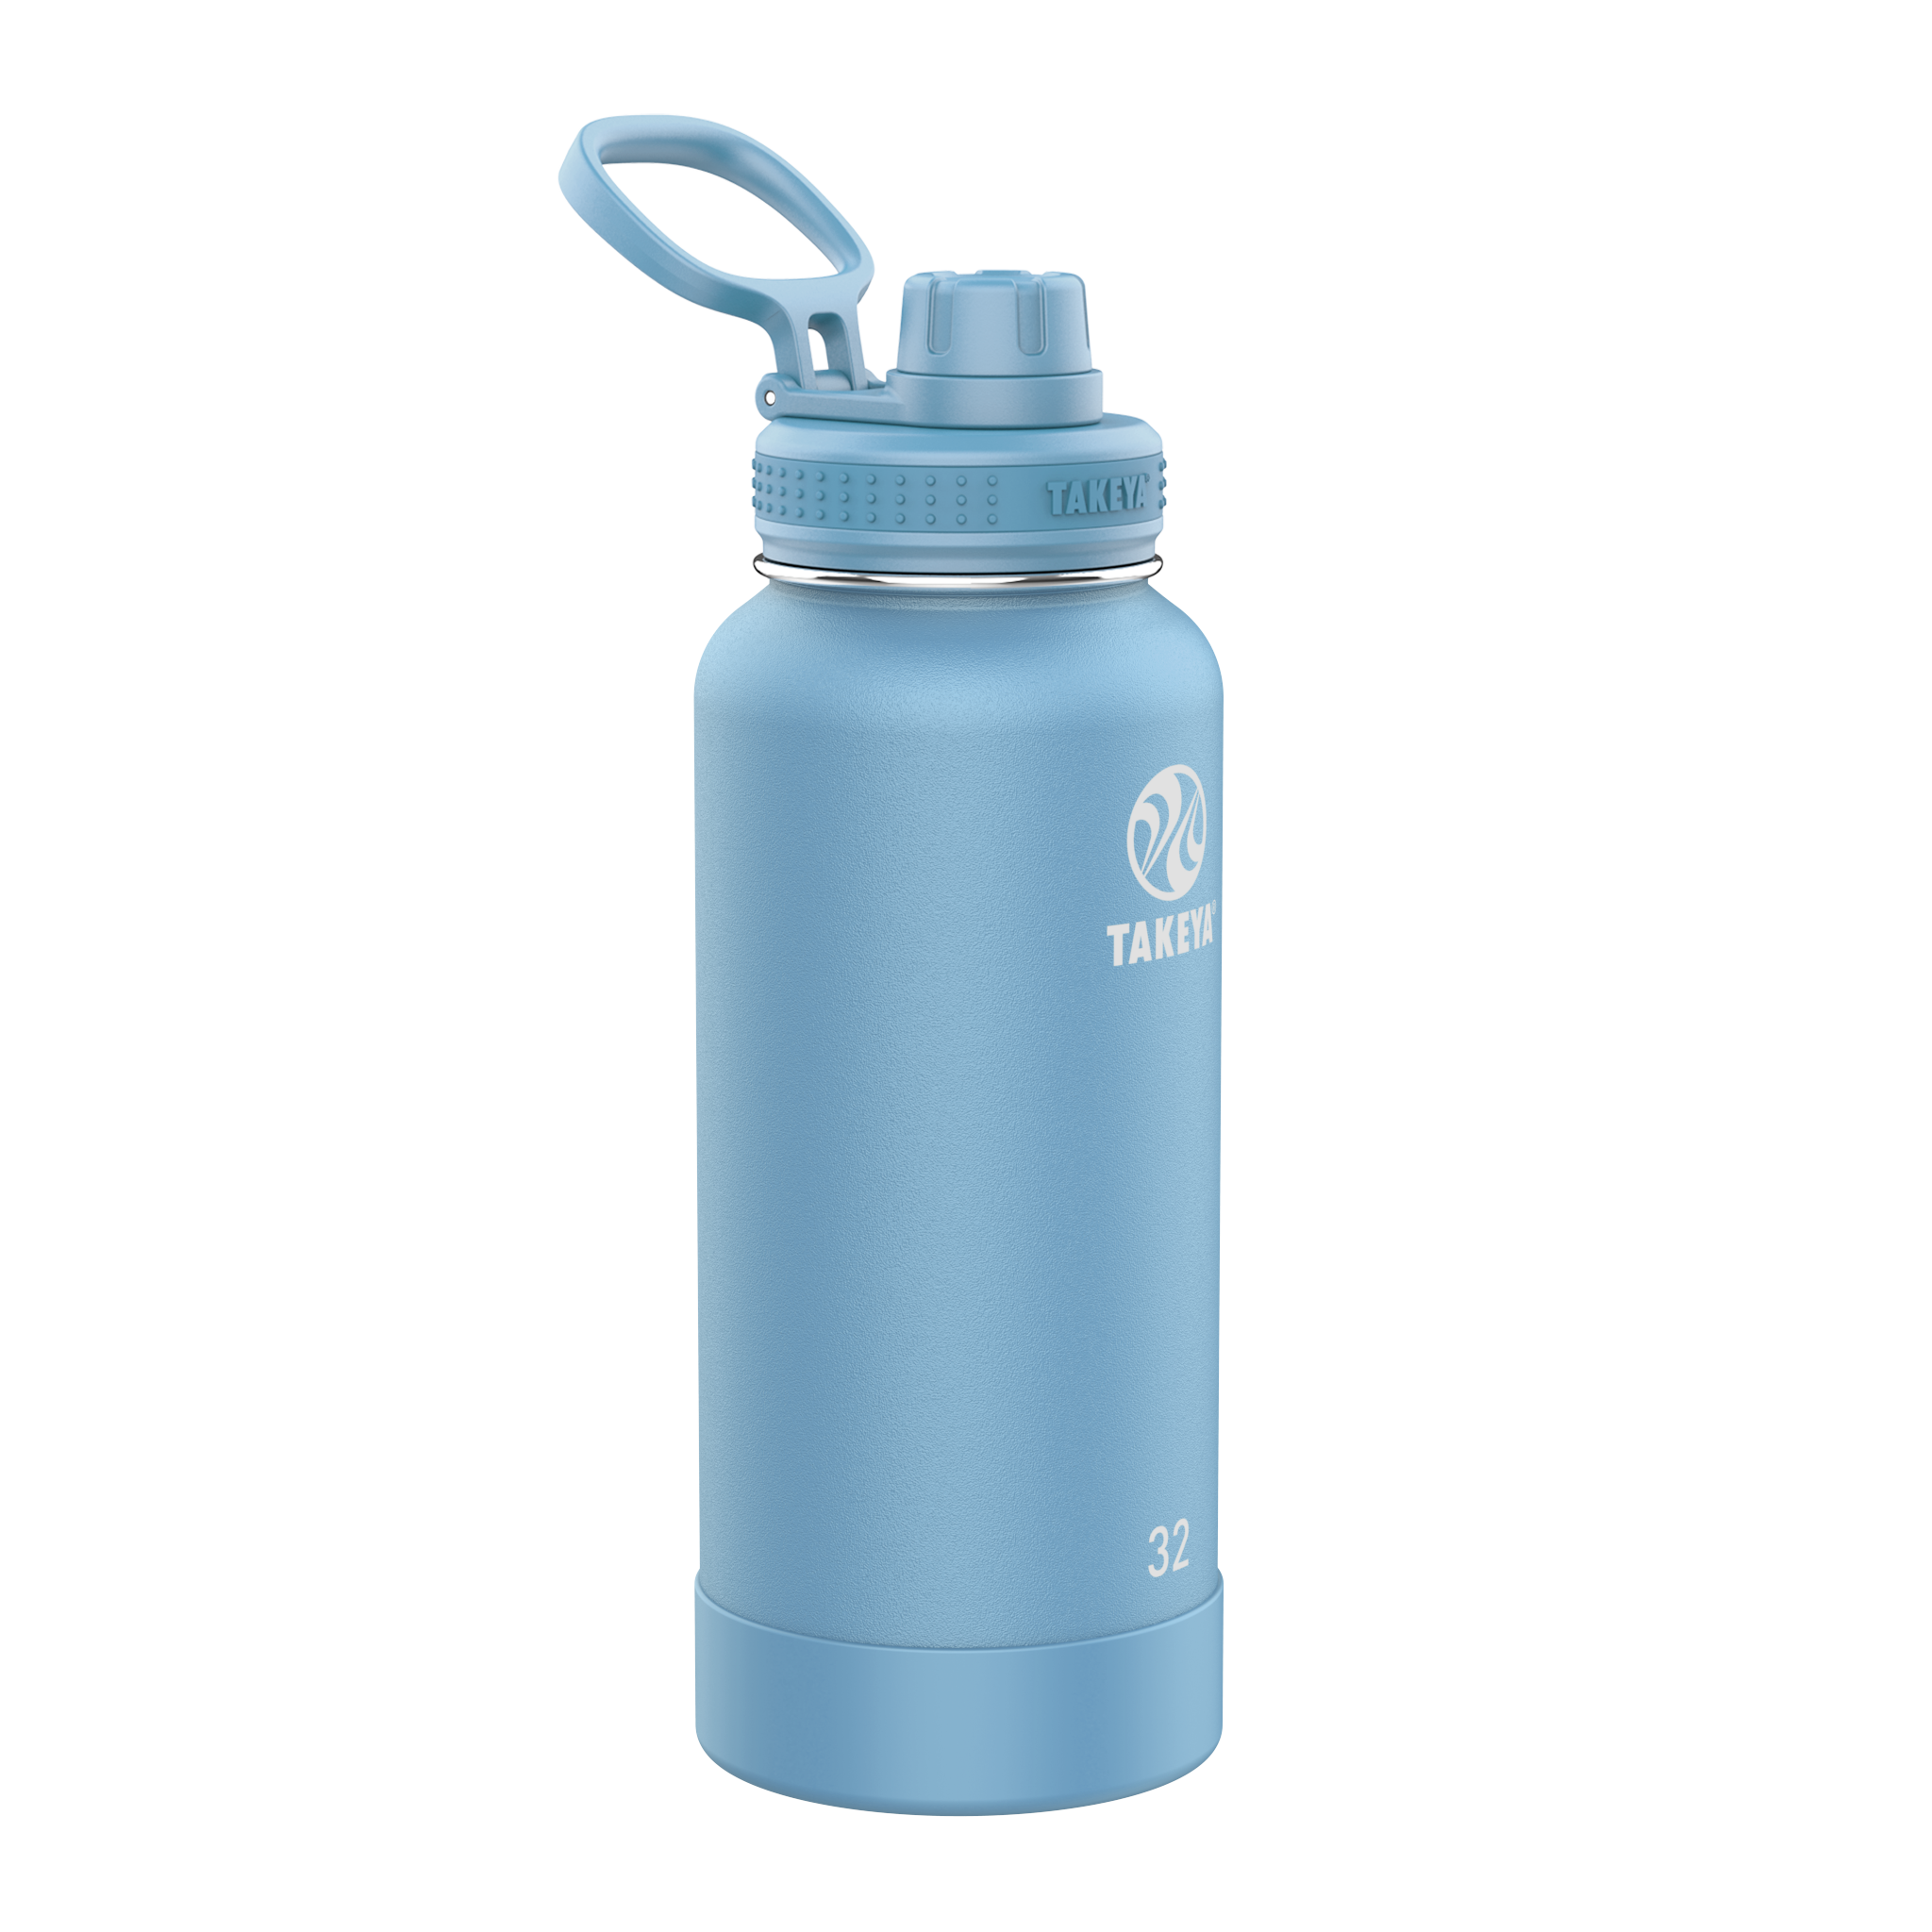 Rubber Painted Stainless Steel Thermos Cup Outdoor Water Bottle Sports  Water Cup